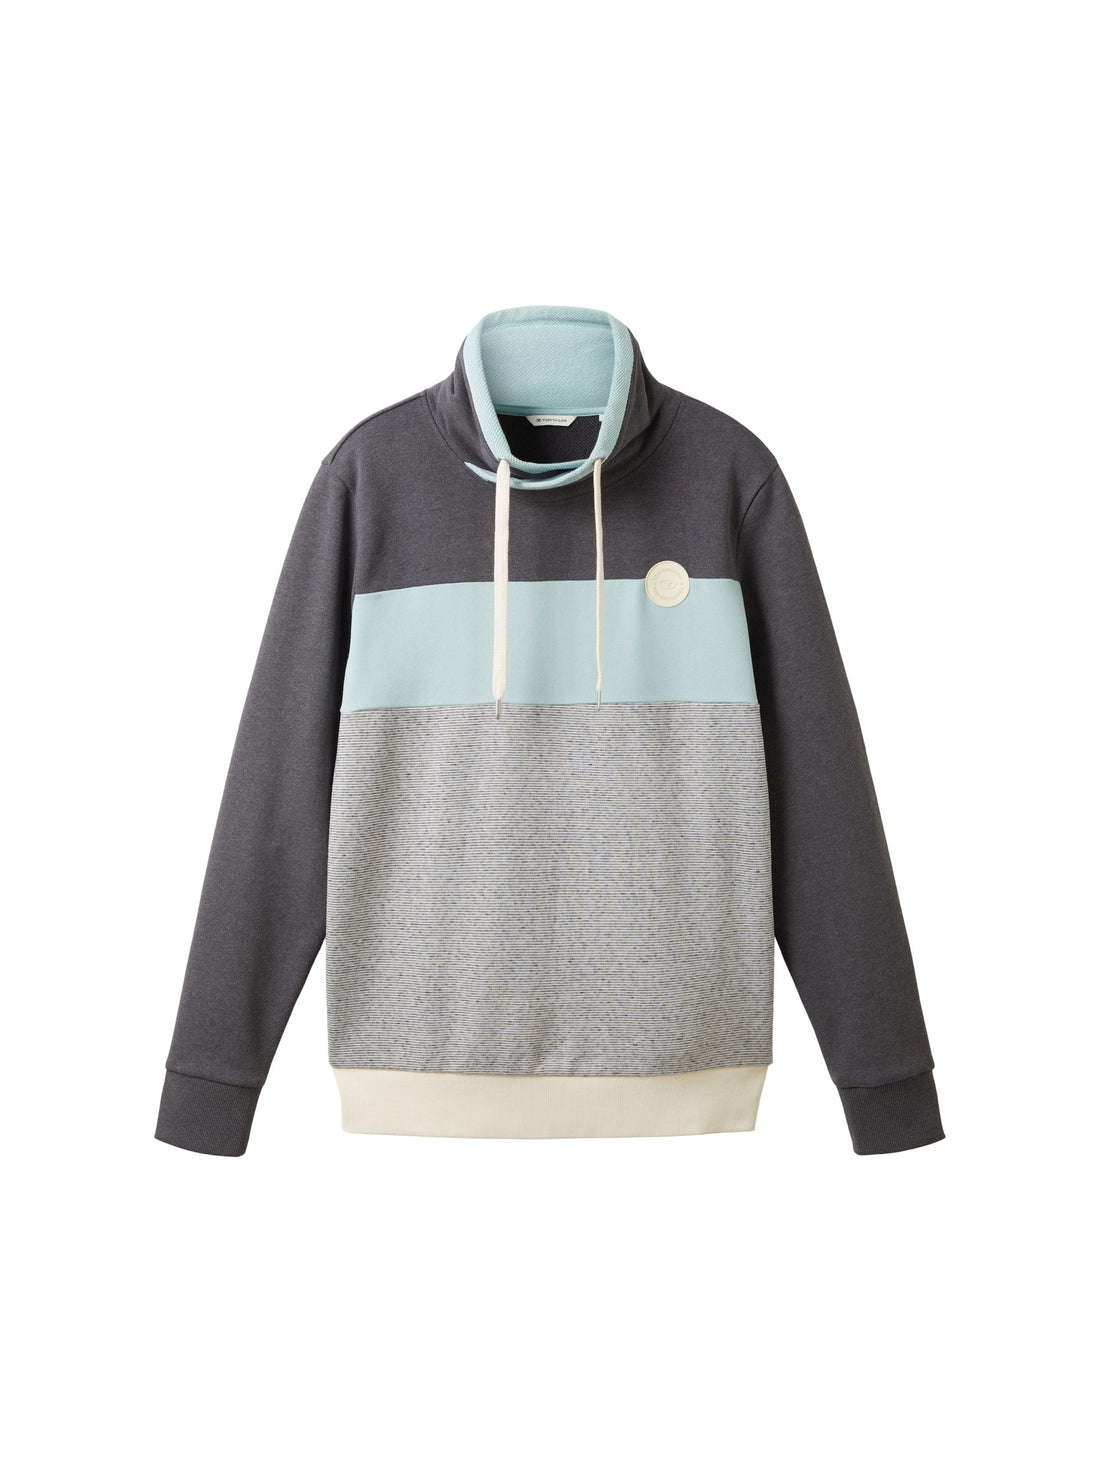 High Collar Hoodie With Color Block Design_1037761_11086_01